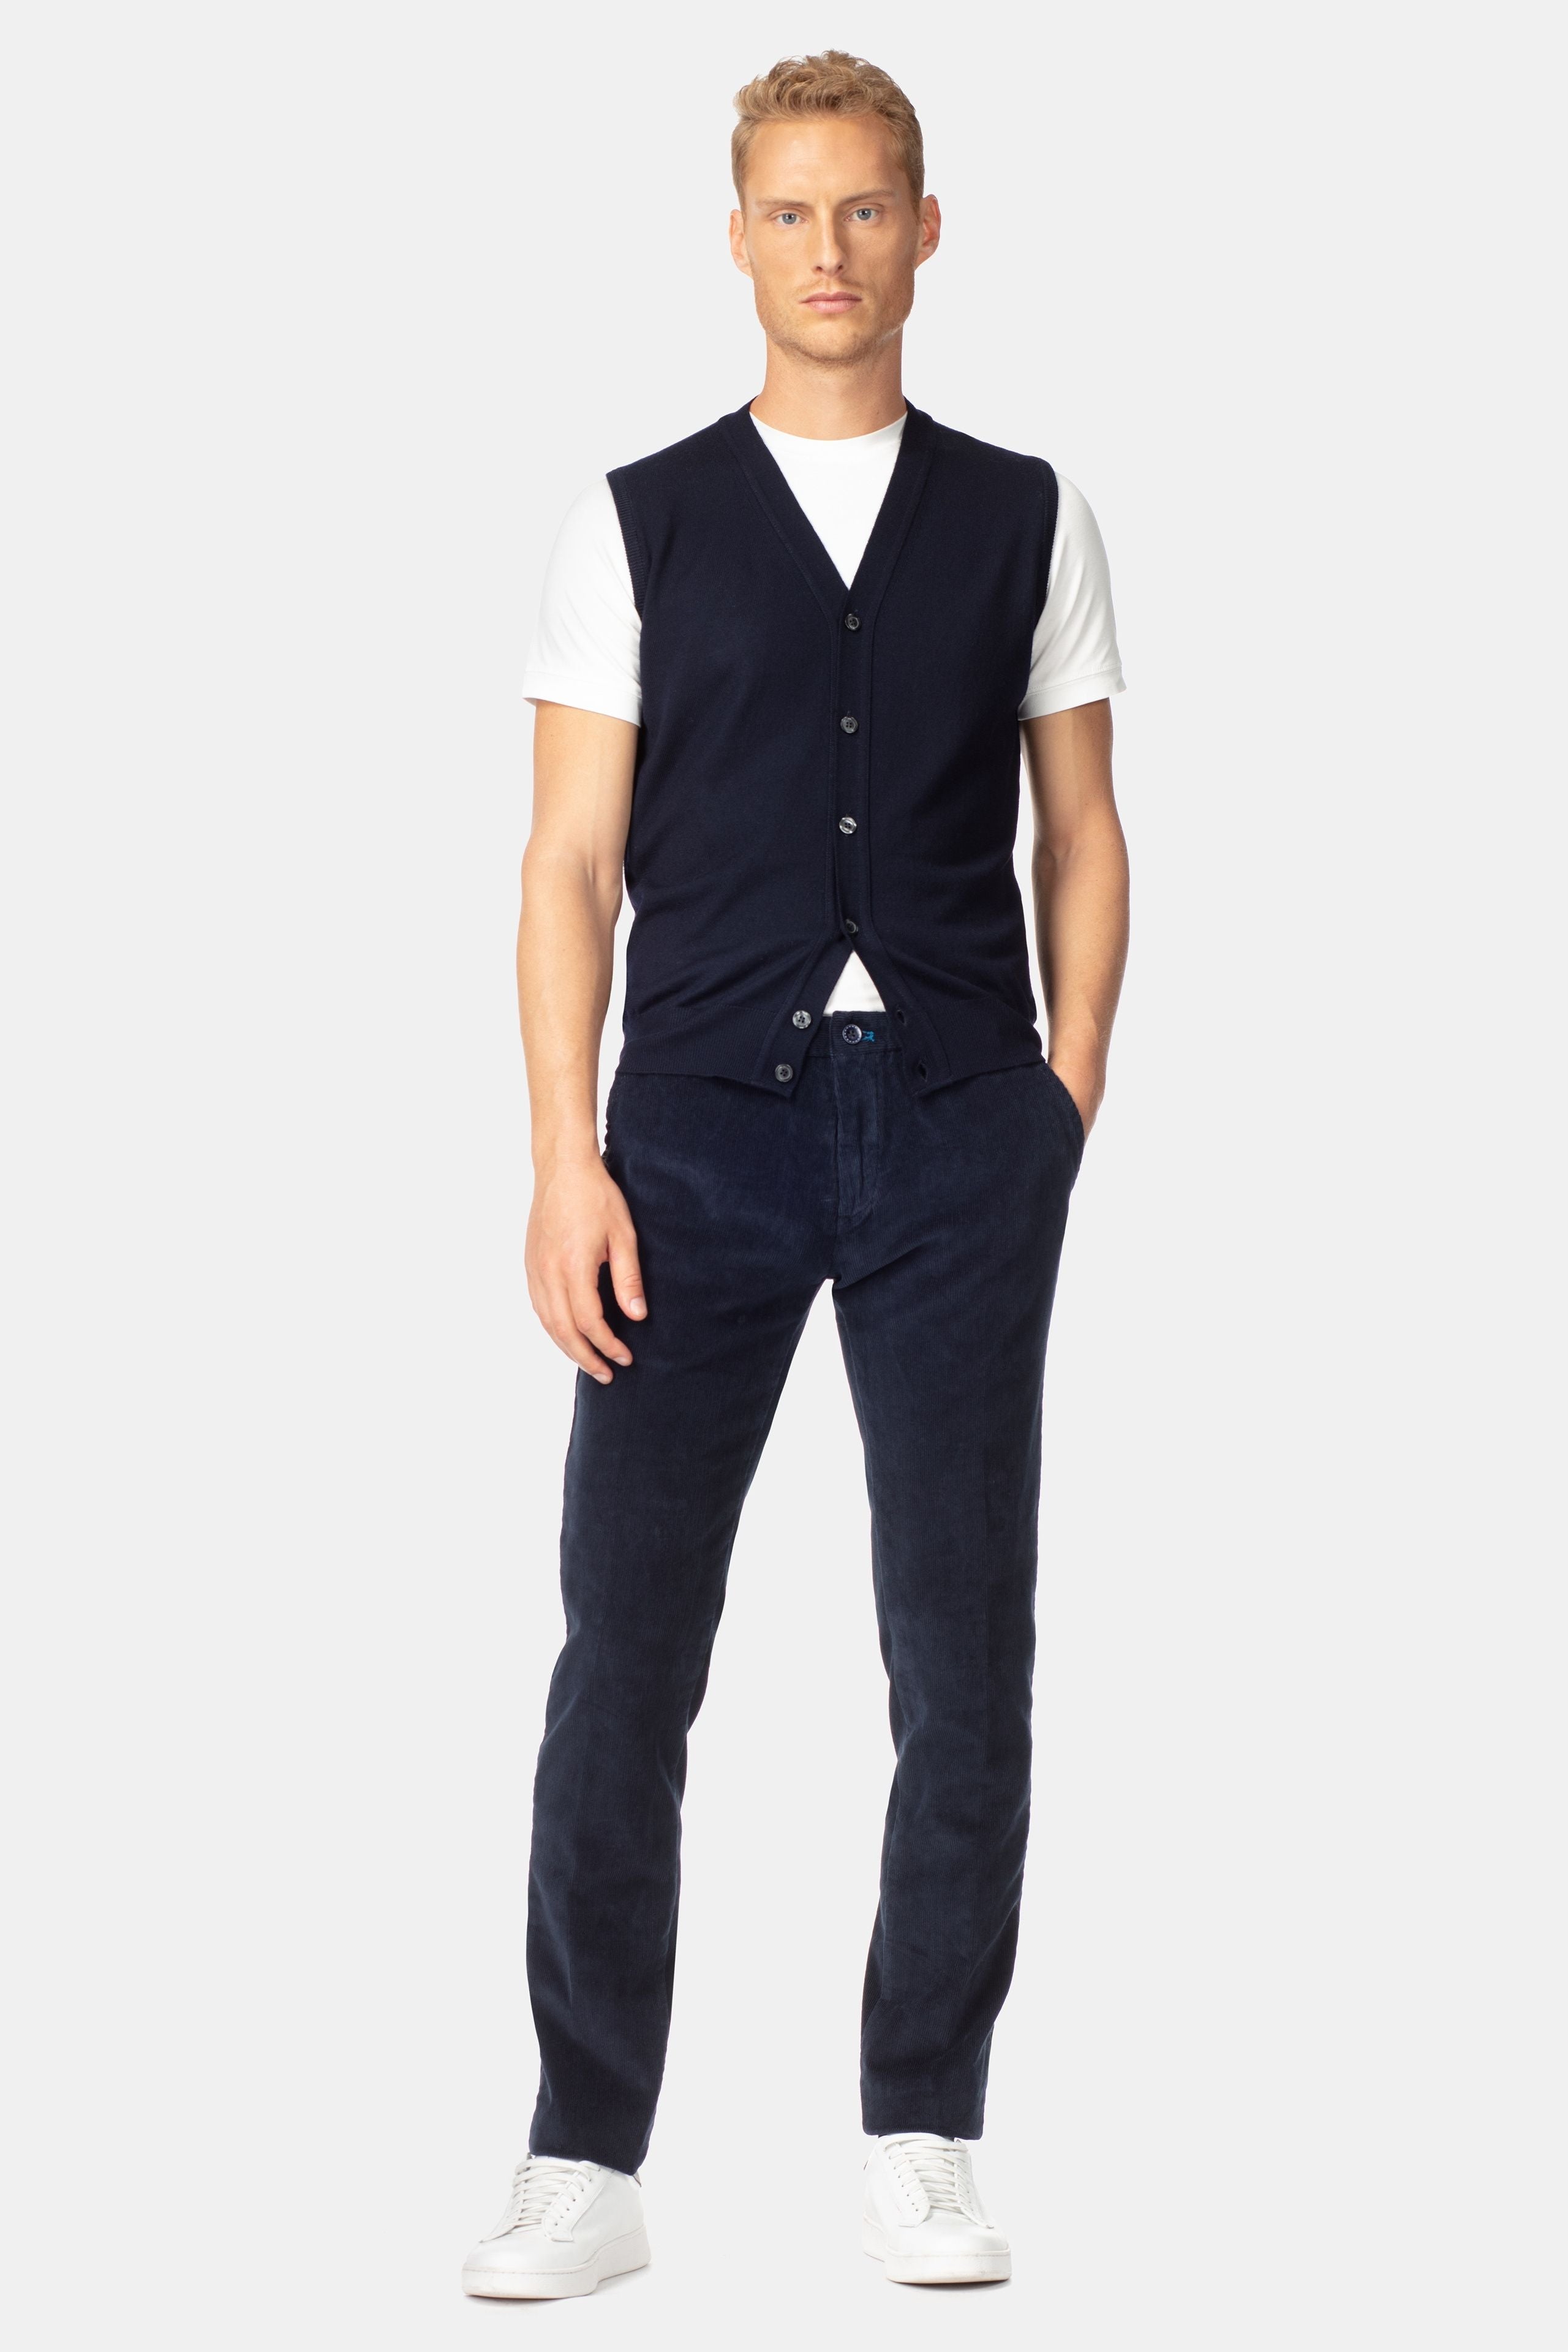 Wool waistcoat with buttons - BLUE